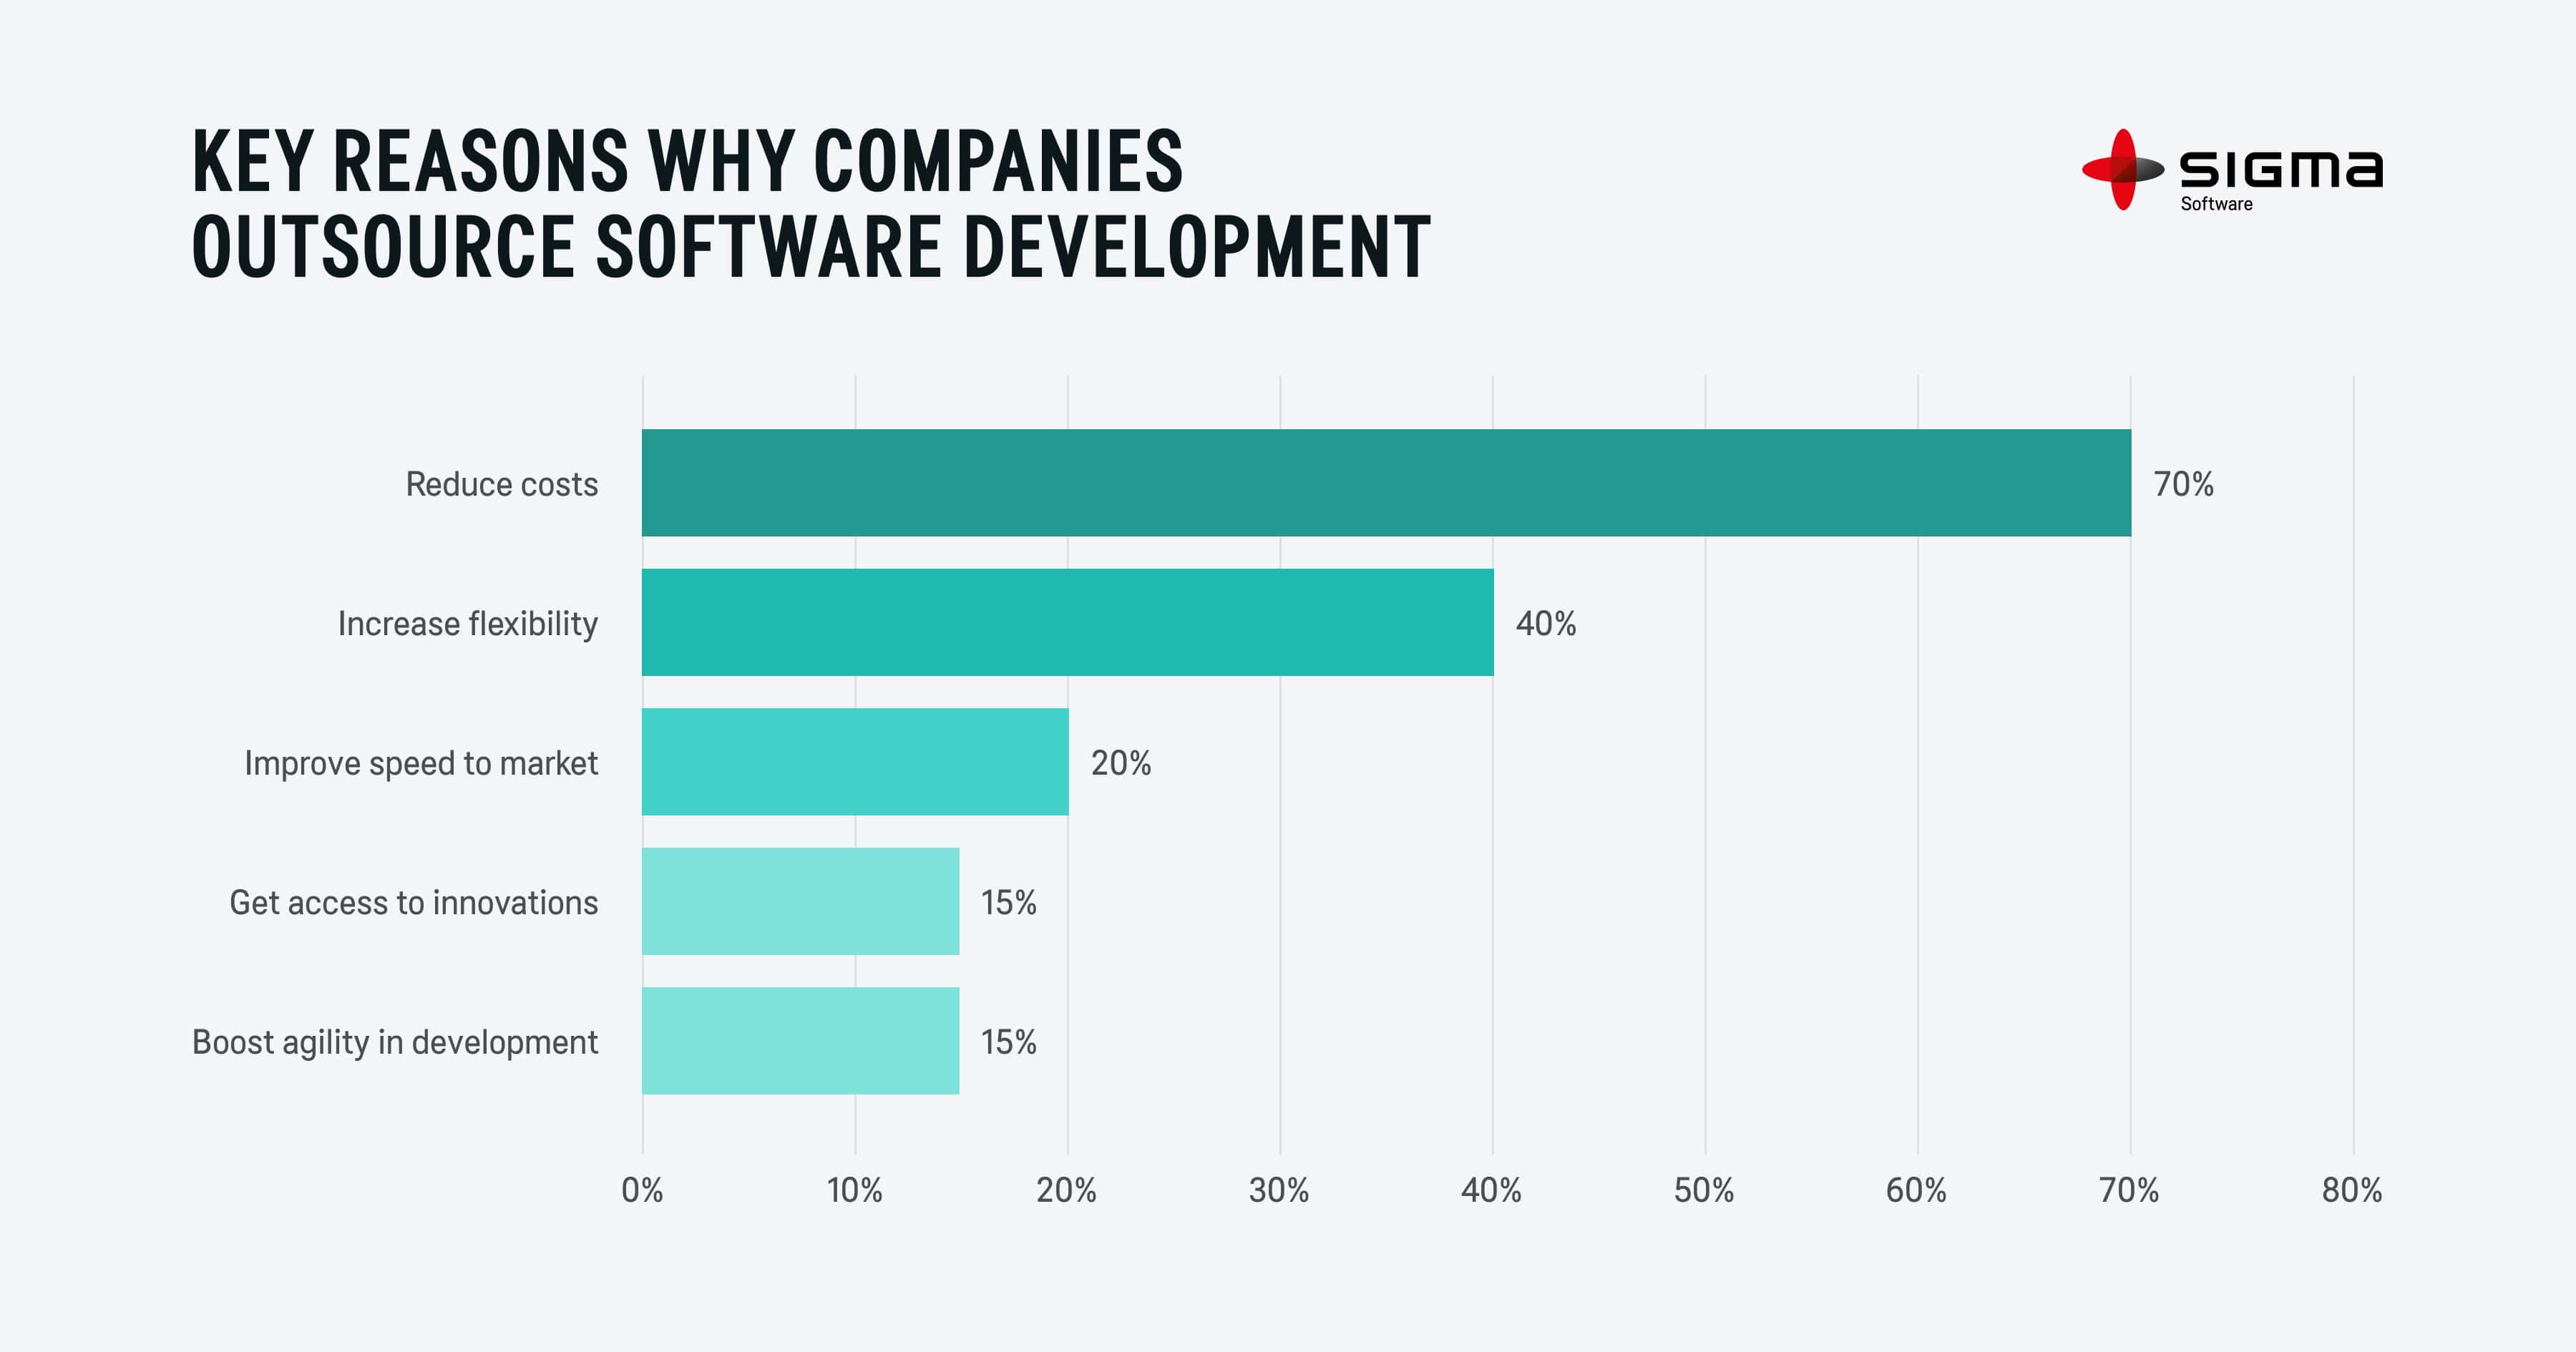 Key Reasons Why Companies Outsource Software Development